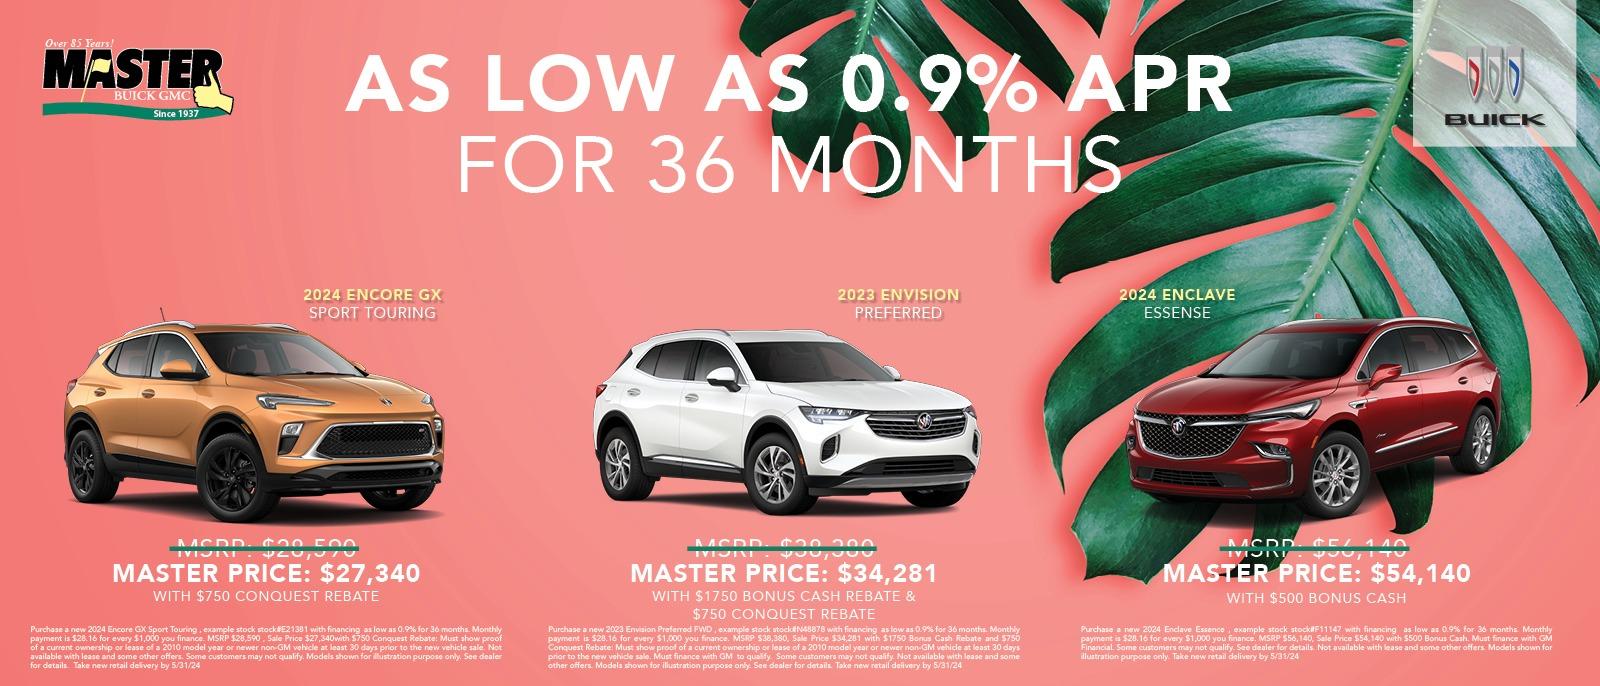 0.9% APR FOR 36 MONTHS